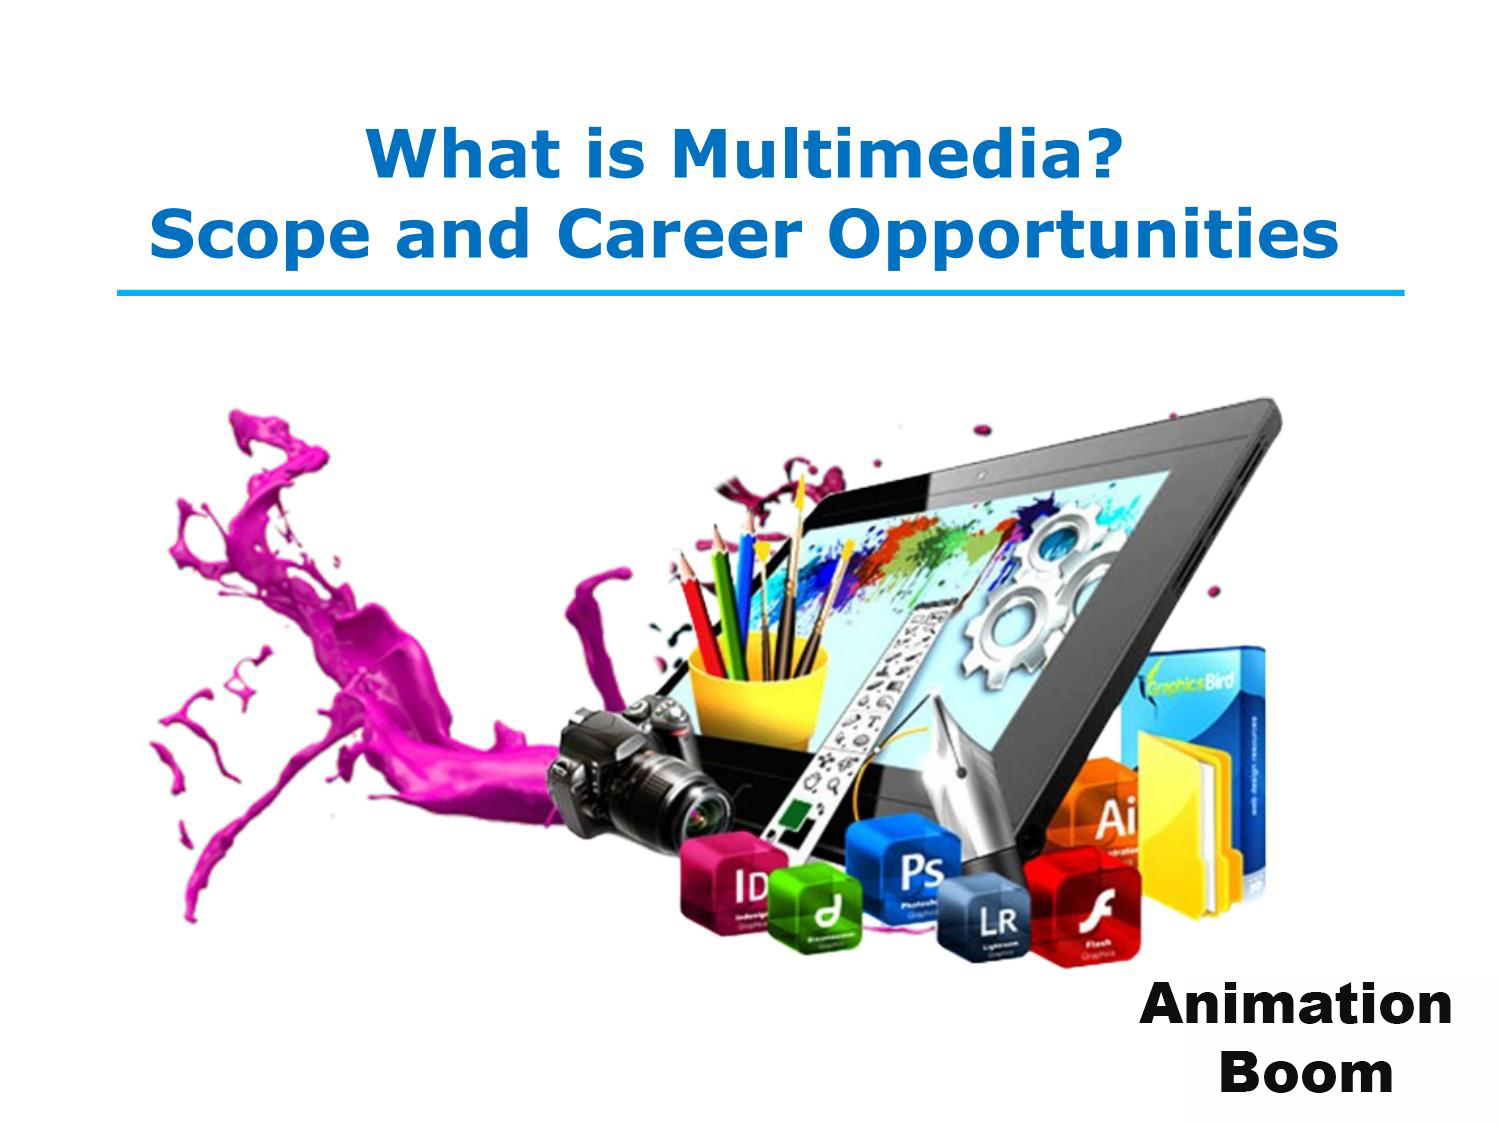 What is the scope of Multimedia?